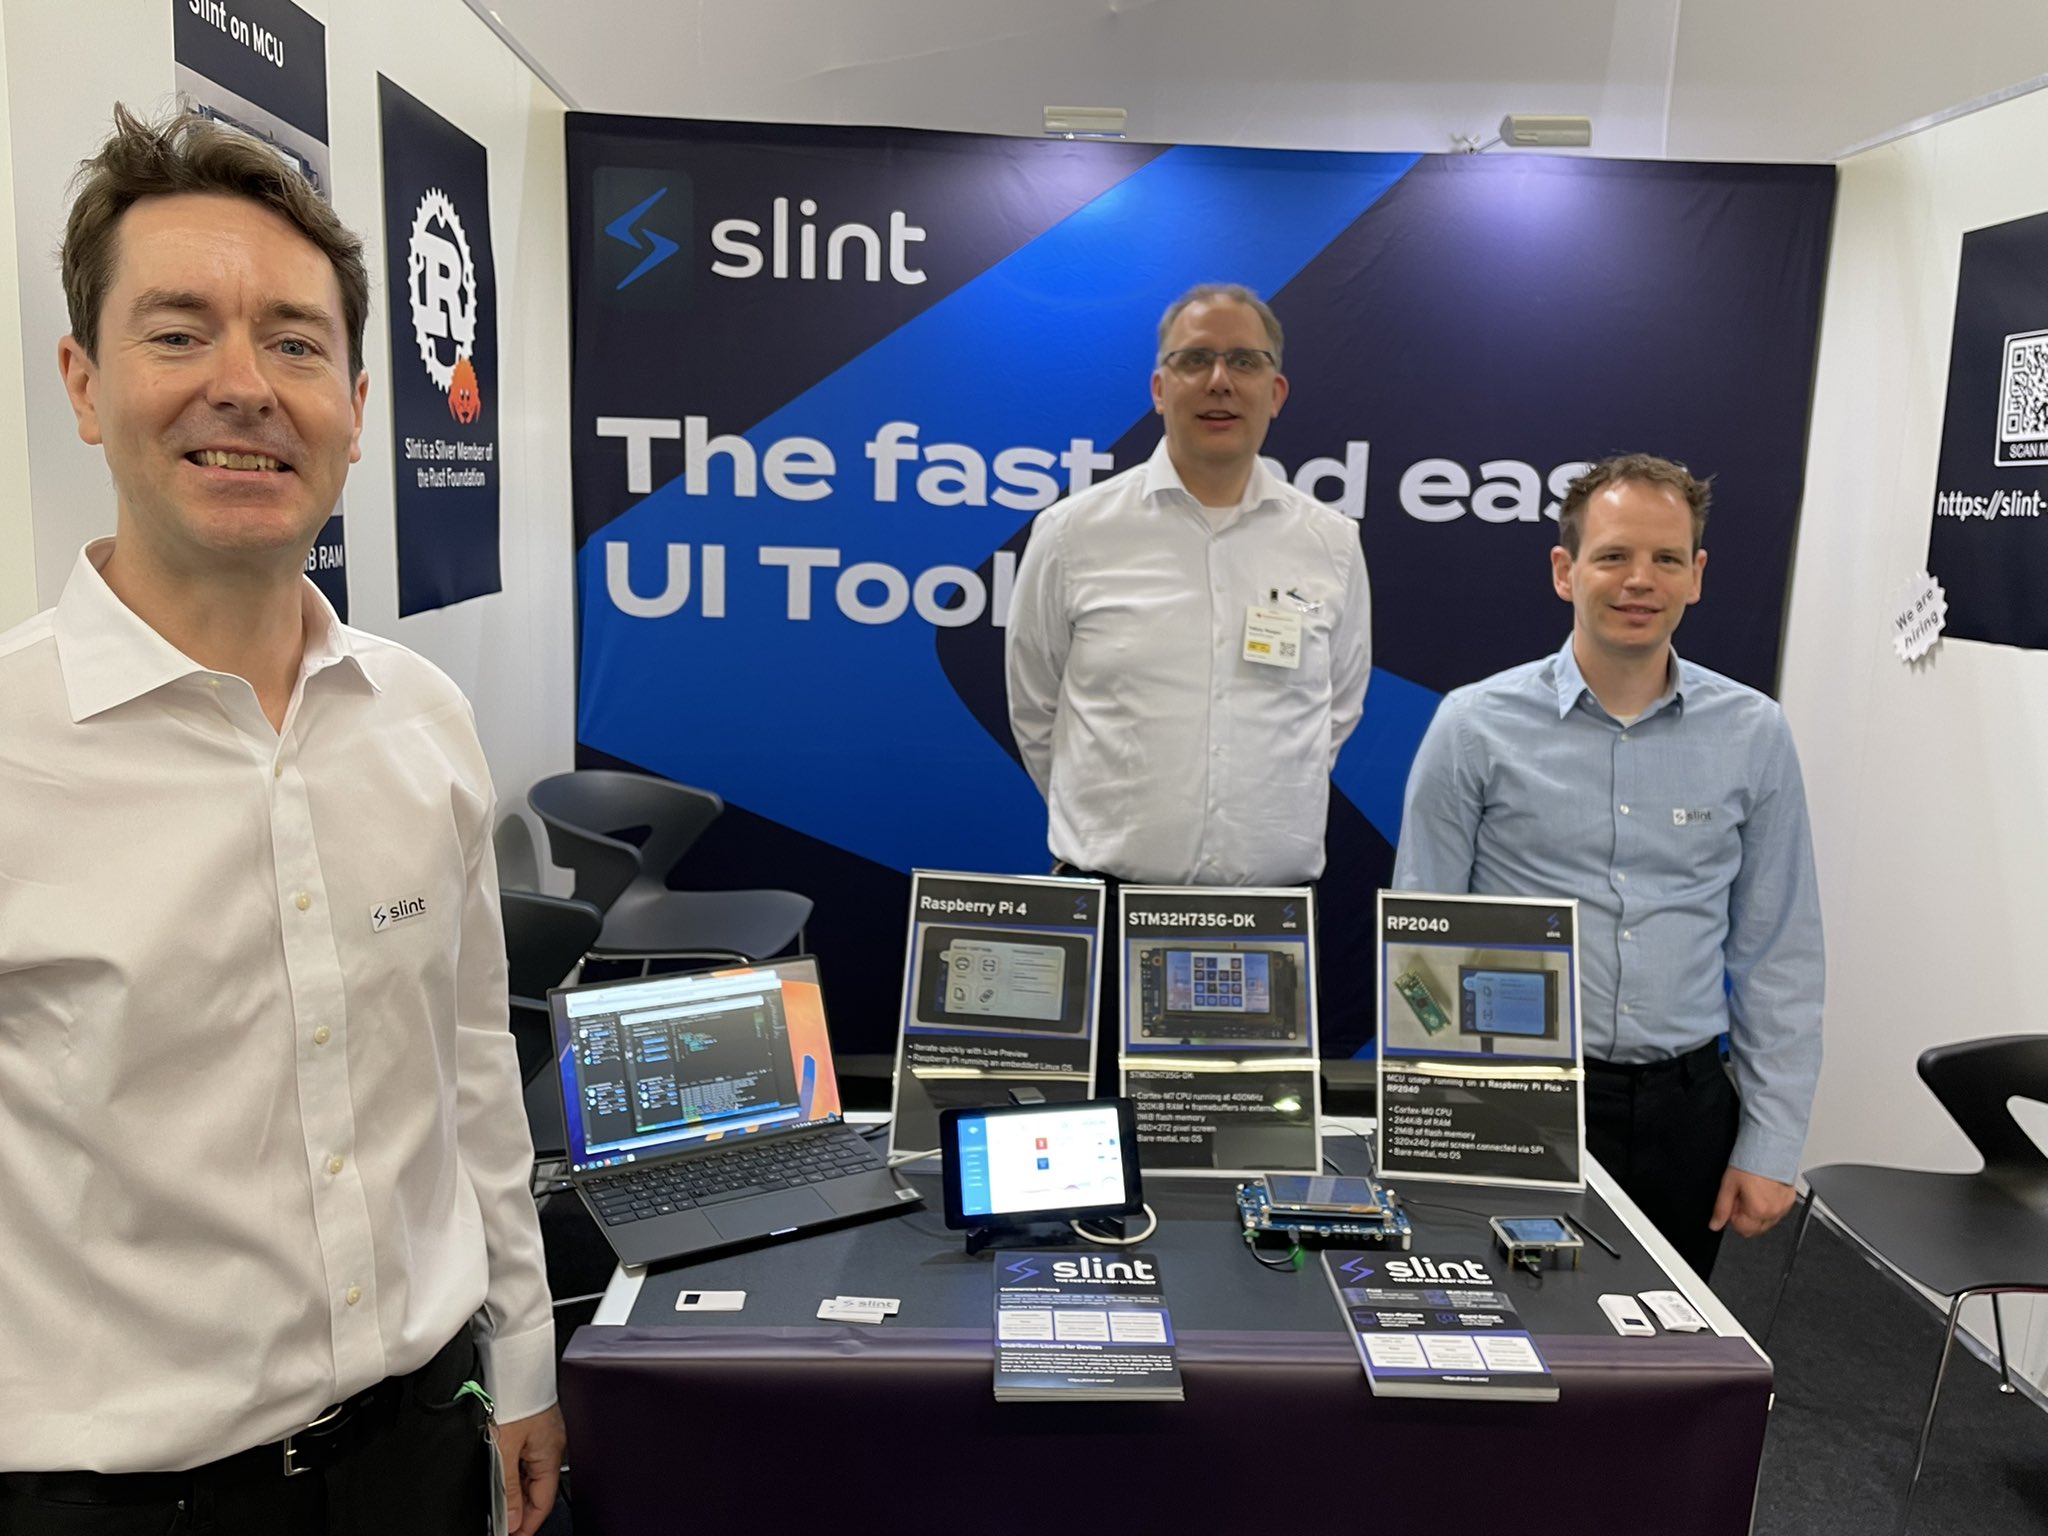 Slint booth at Embedded World 2022